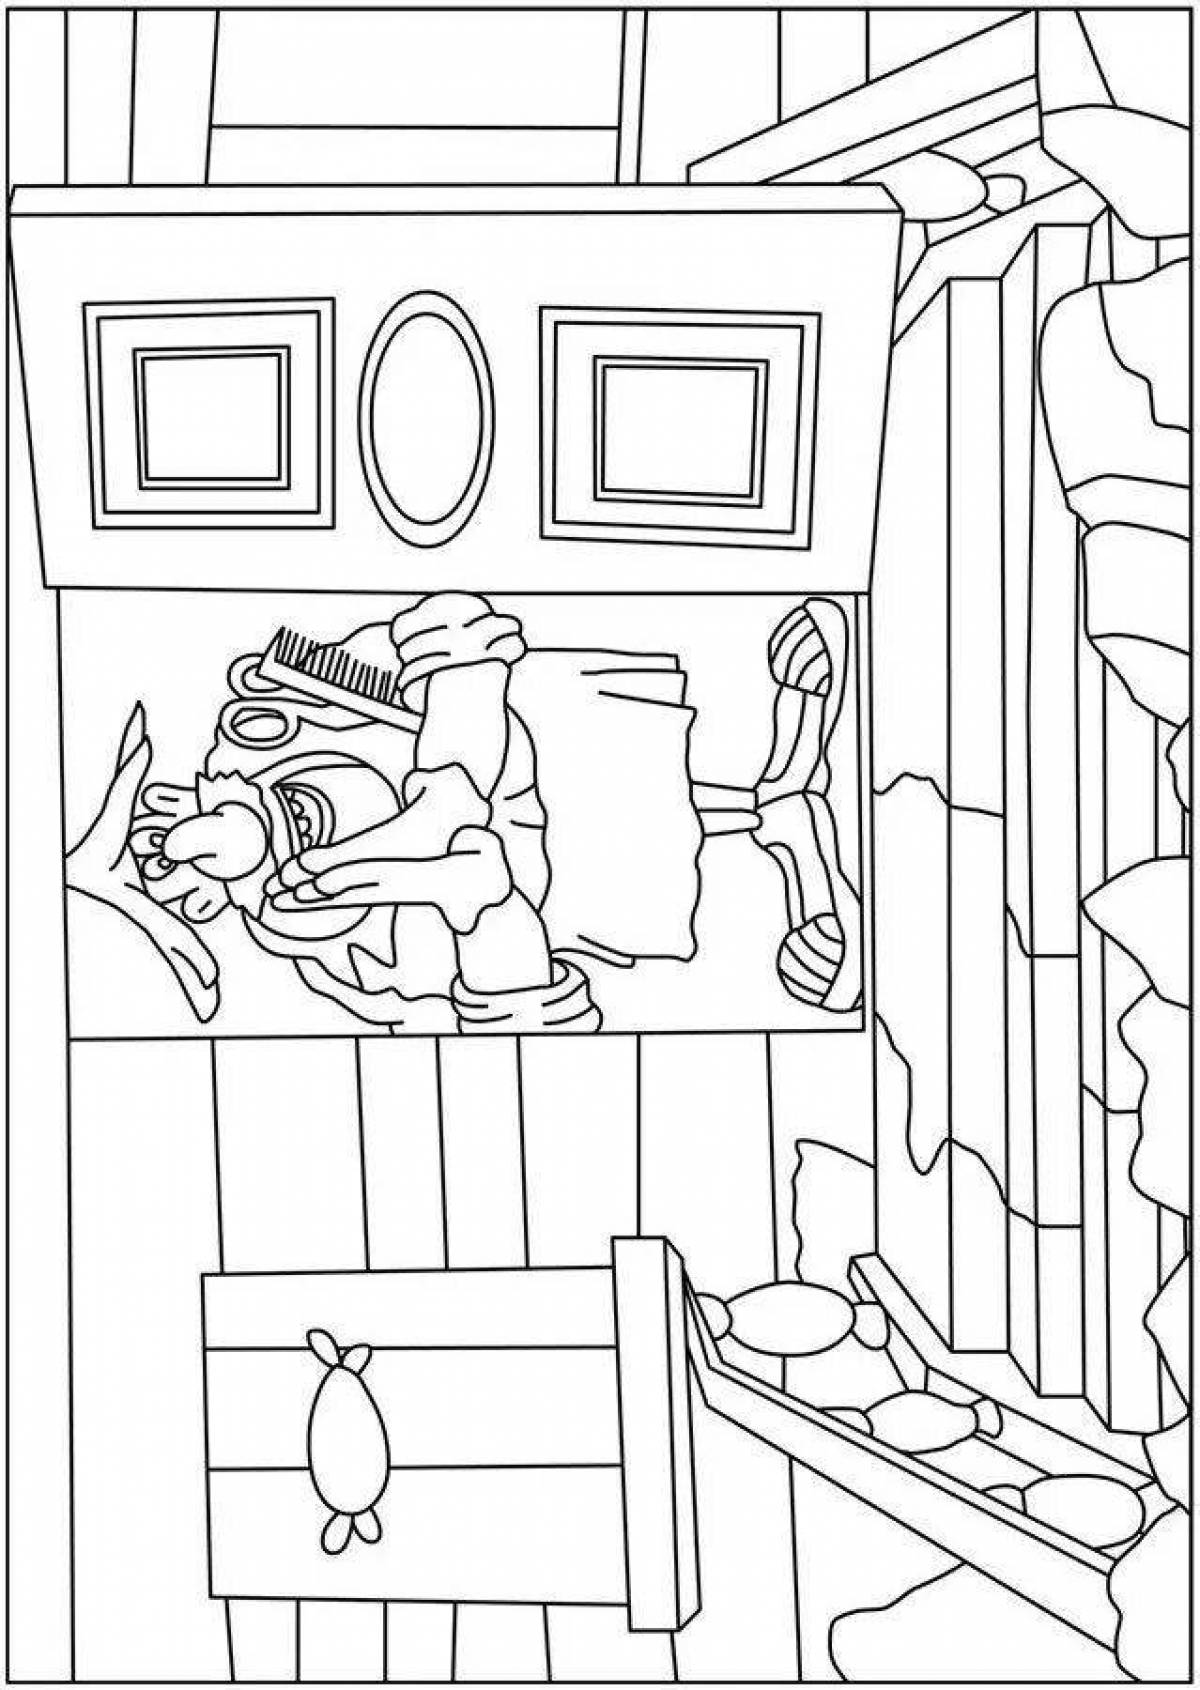 Coloring page fascinating captain vrungel